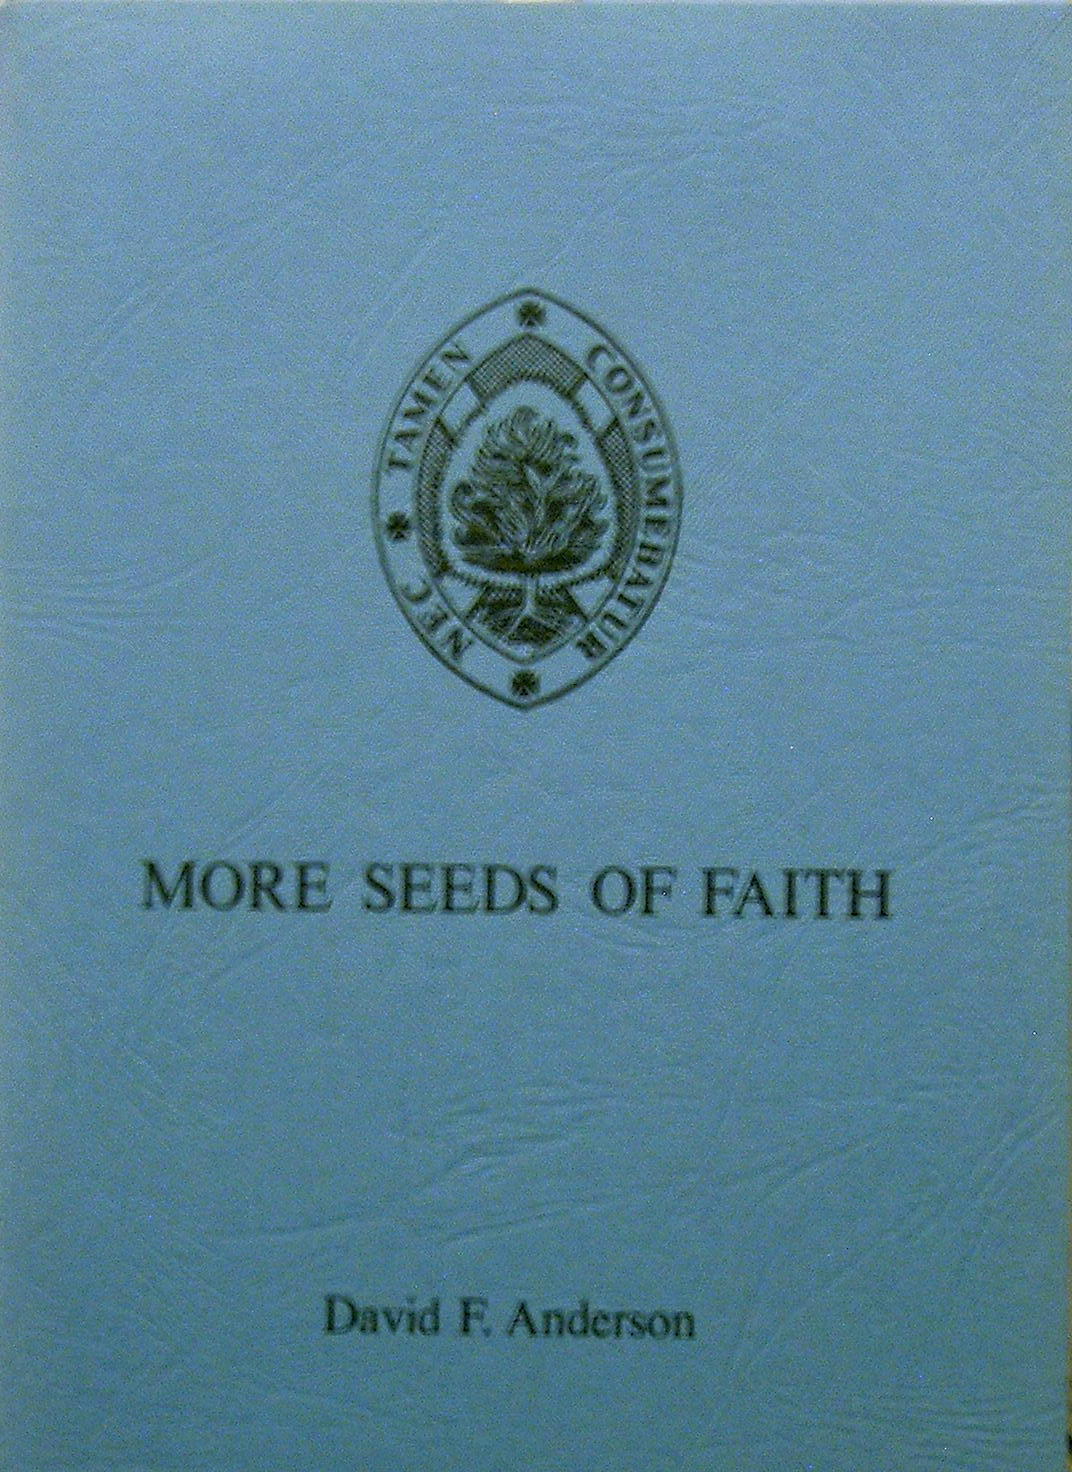 More Seeds of Faith by David F. Anderson